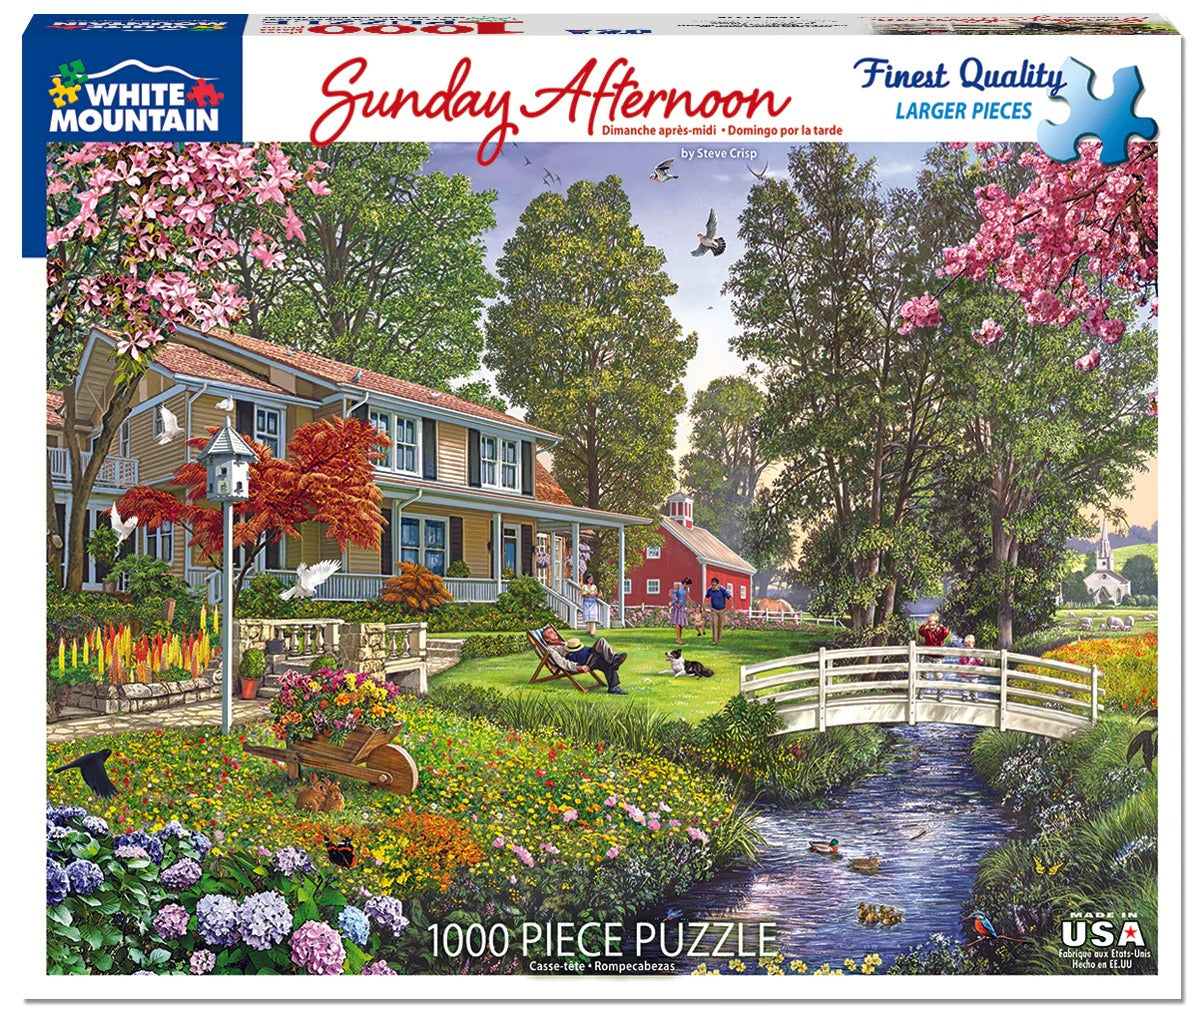 Sunday Afternoon 1000 Piece Jigsaw Puzzle by White Mountain